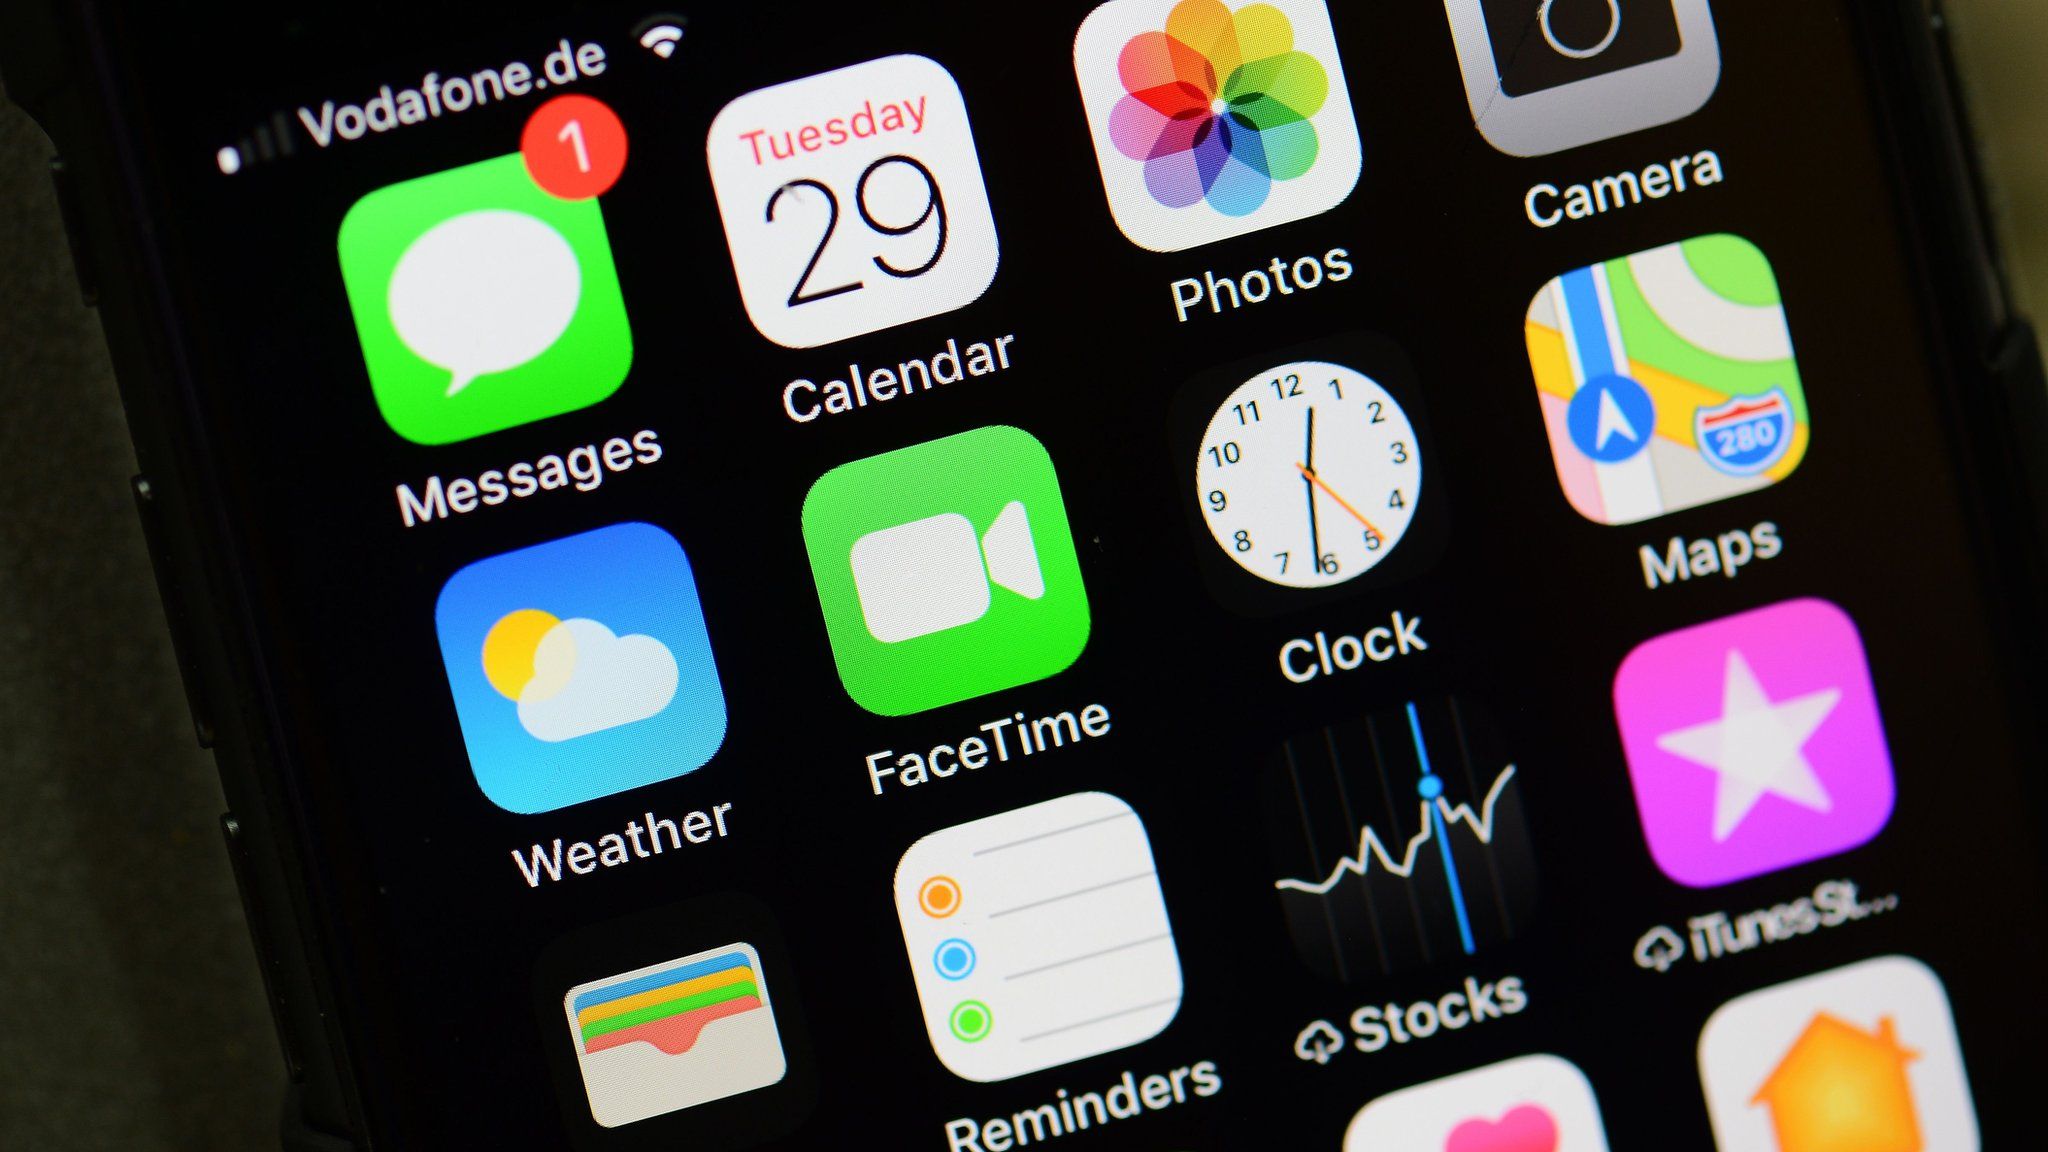 An iPhone home screen is pictured showing its many apps